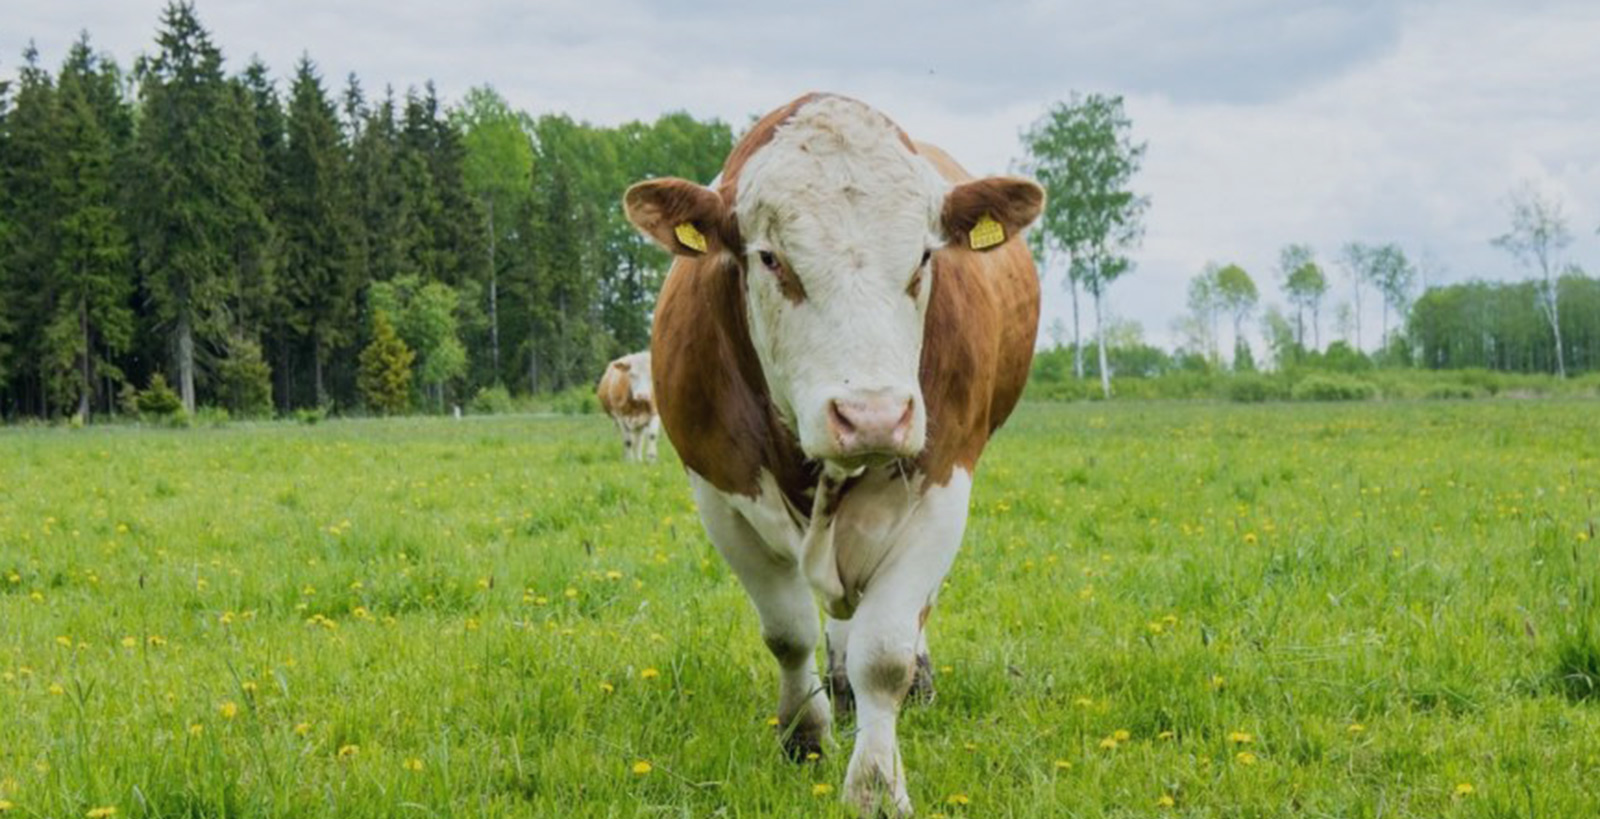 Estonia Organic Grass-Fed Beef: Working With What Nature Provides